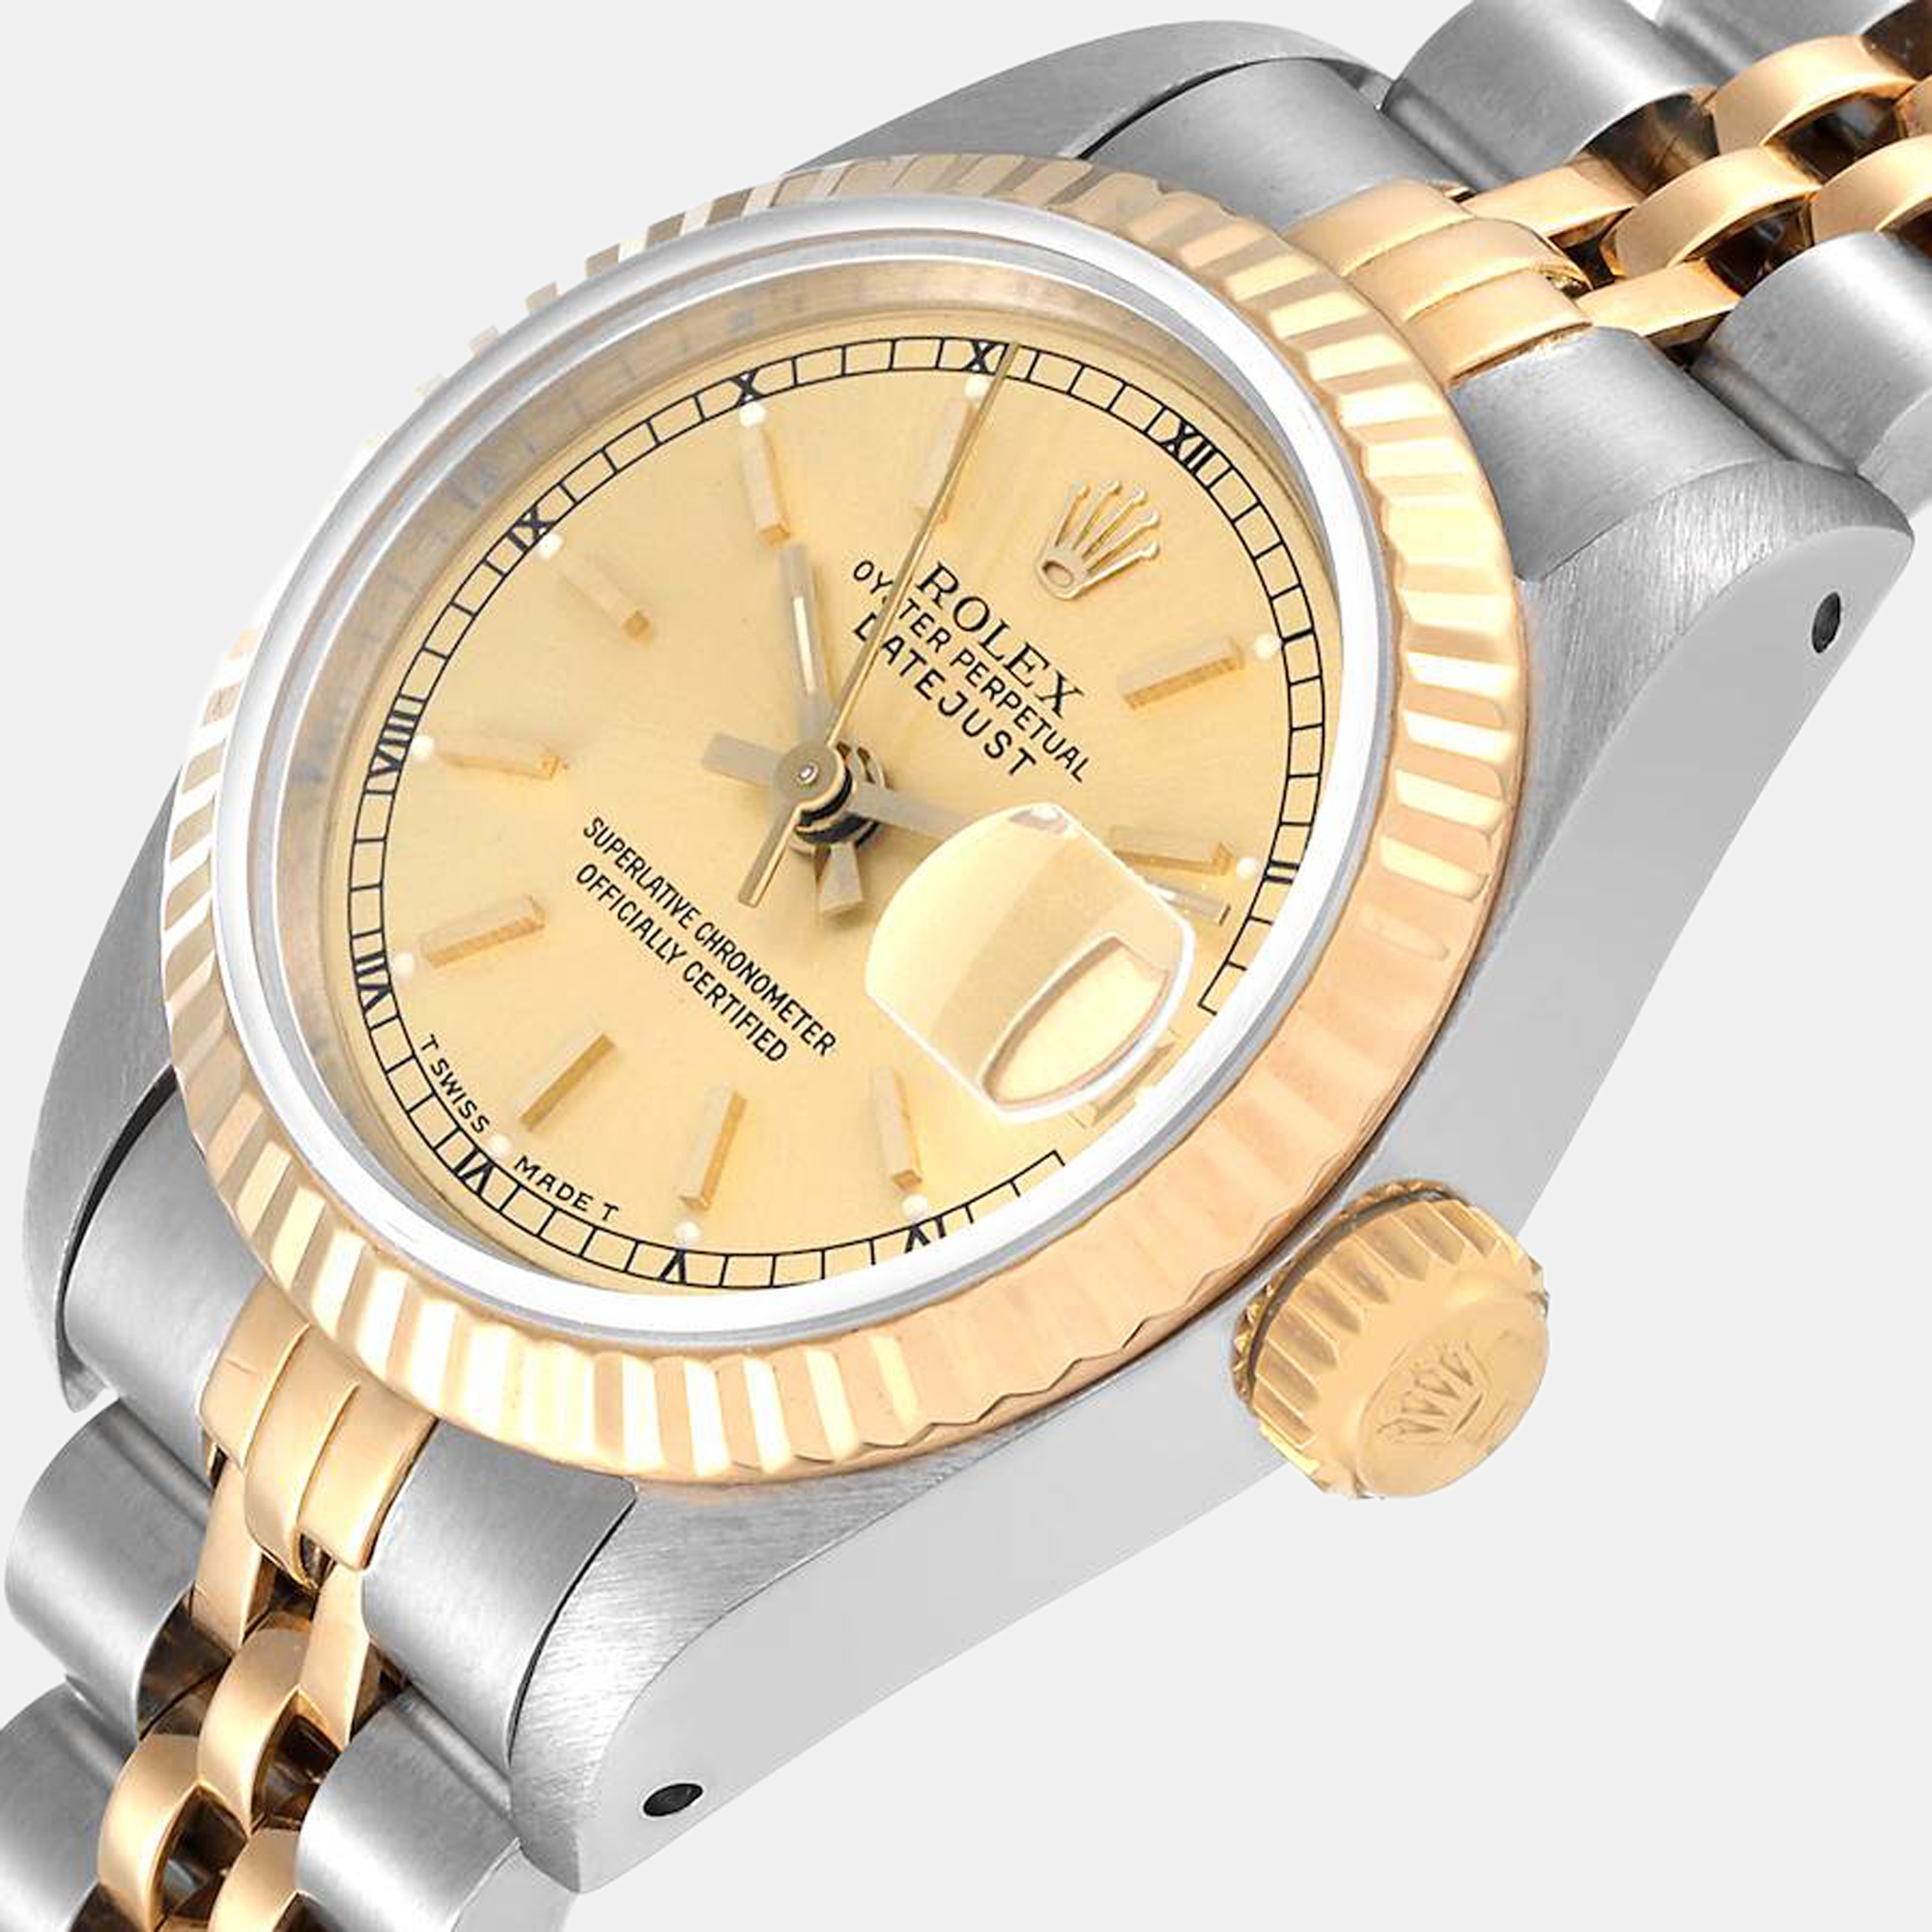 

Rolex Champagne 18k Yellow Gold And Stainless Steel Datejust 69173 Automatic Women's Wristwatch 26 mm